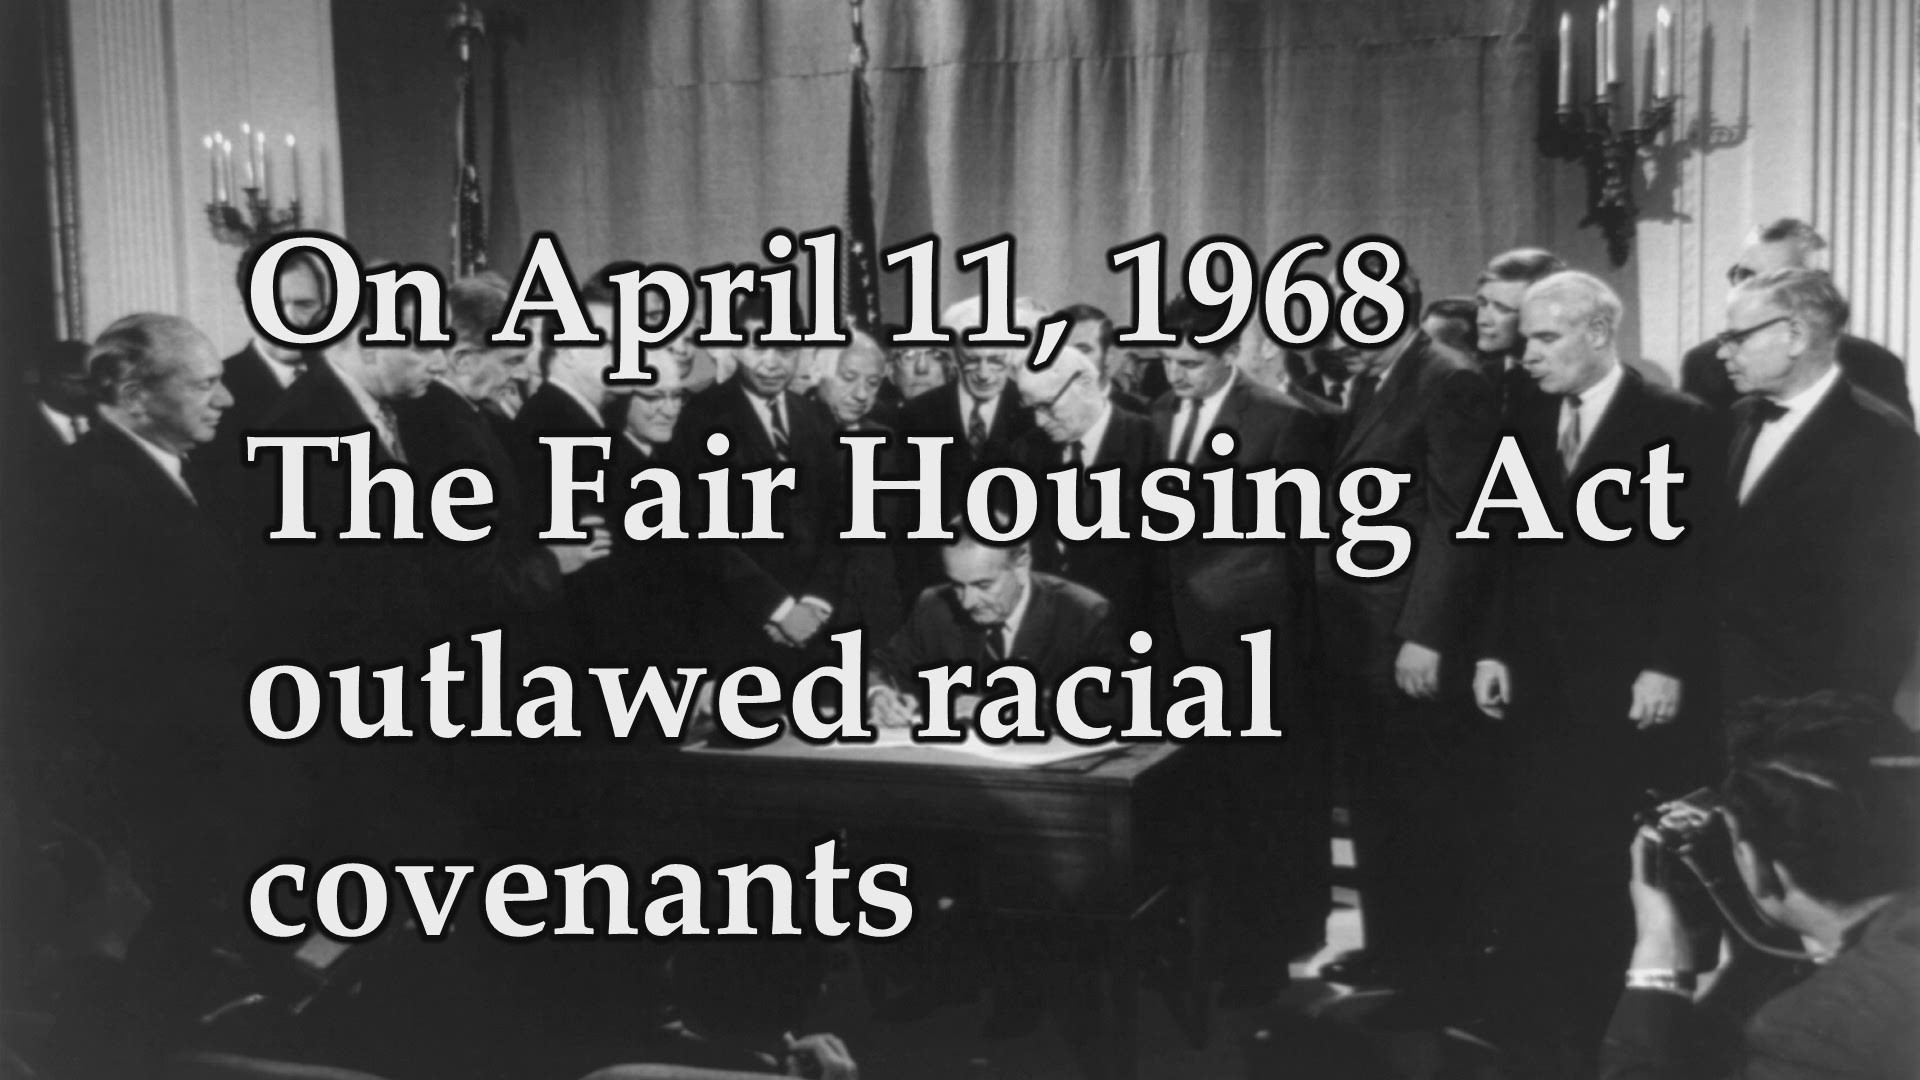 Racial covenants can still be found in many Portland home deeds, although the restrictions were outlawed in 1968